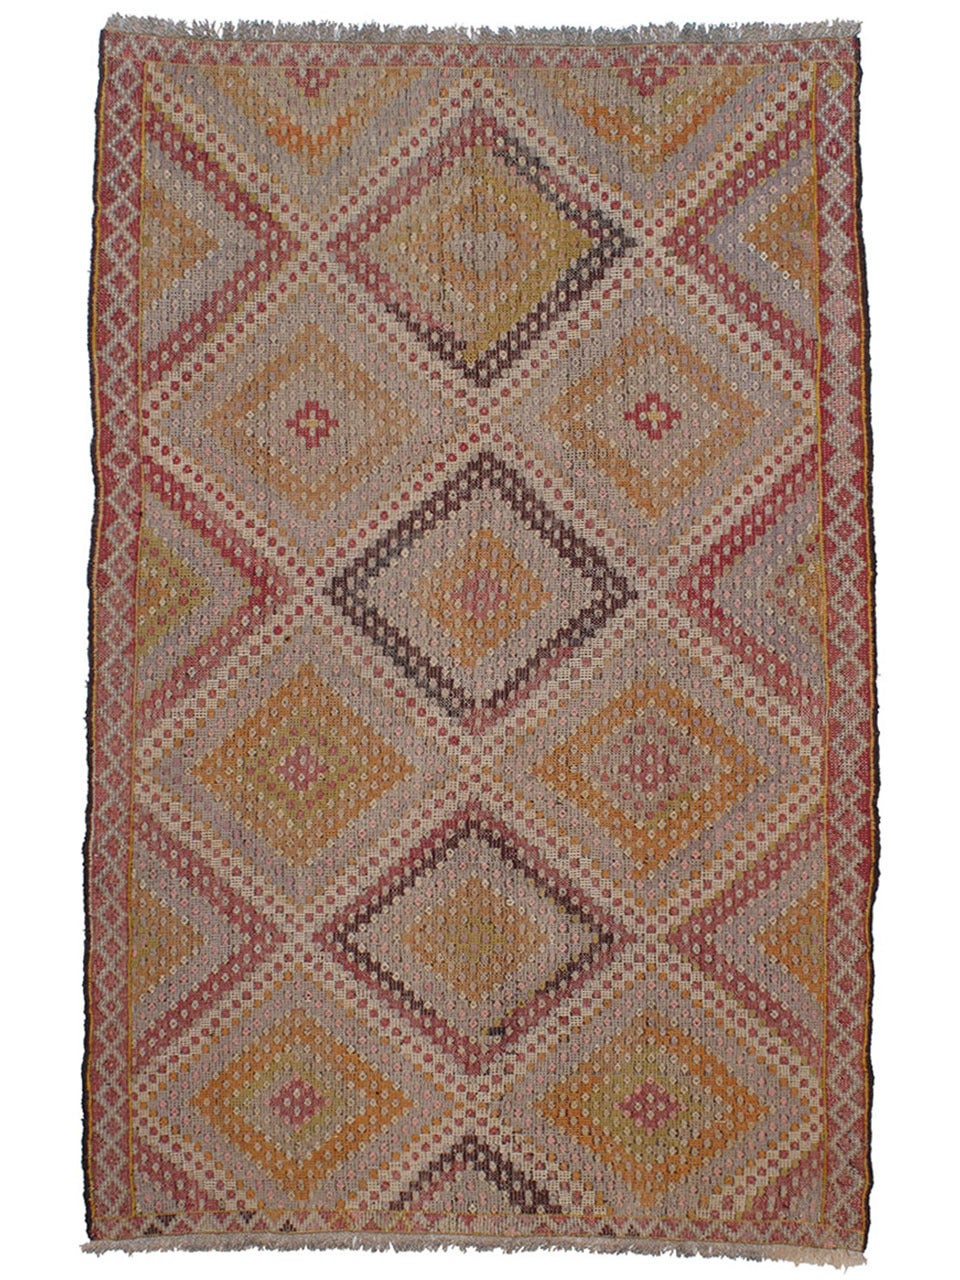 A beautiful old tribal flat-weave from Western Turkey, woven in the intricate 